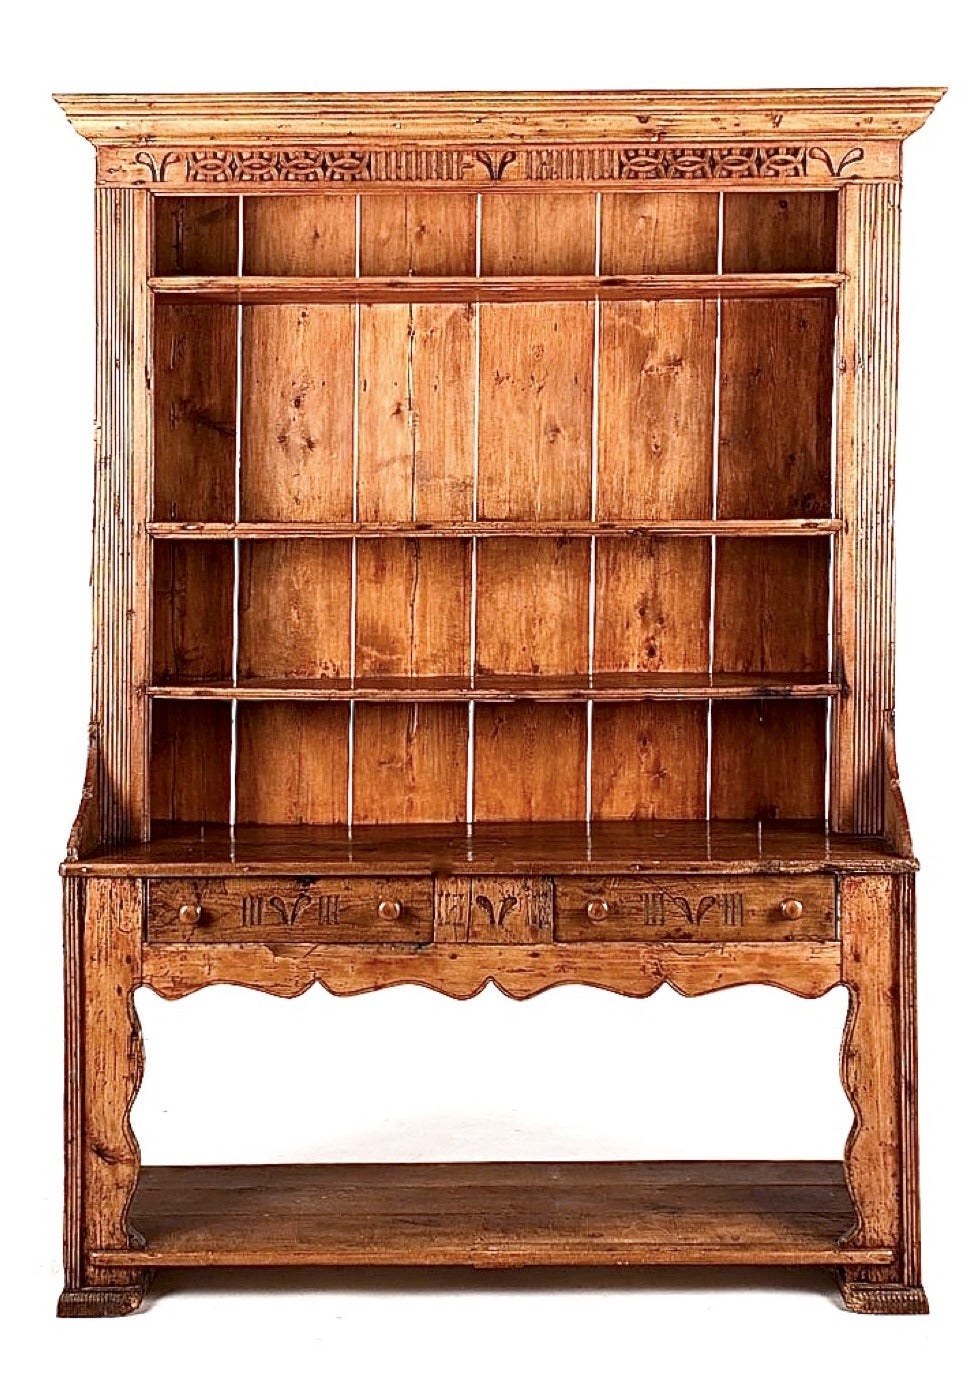 A charming provincial piece, an Irish version of the more commonly seen Welsh dresser, dating to the late 18th/early 19th century. In two pieces, the upper section with three fixed shelves, the bottom, with two drawers, both sections with relief